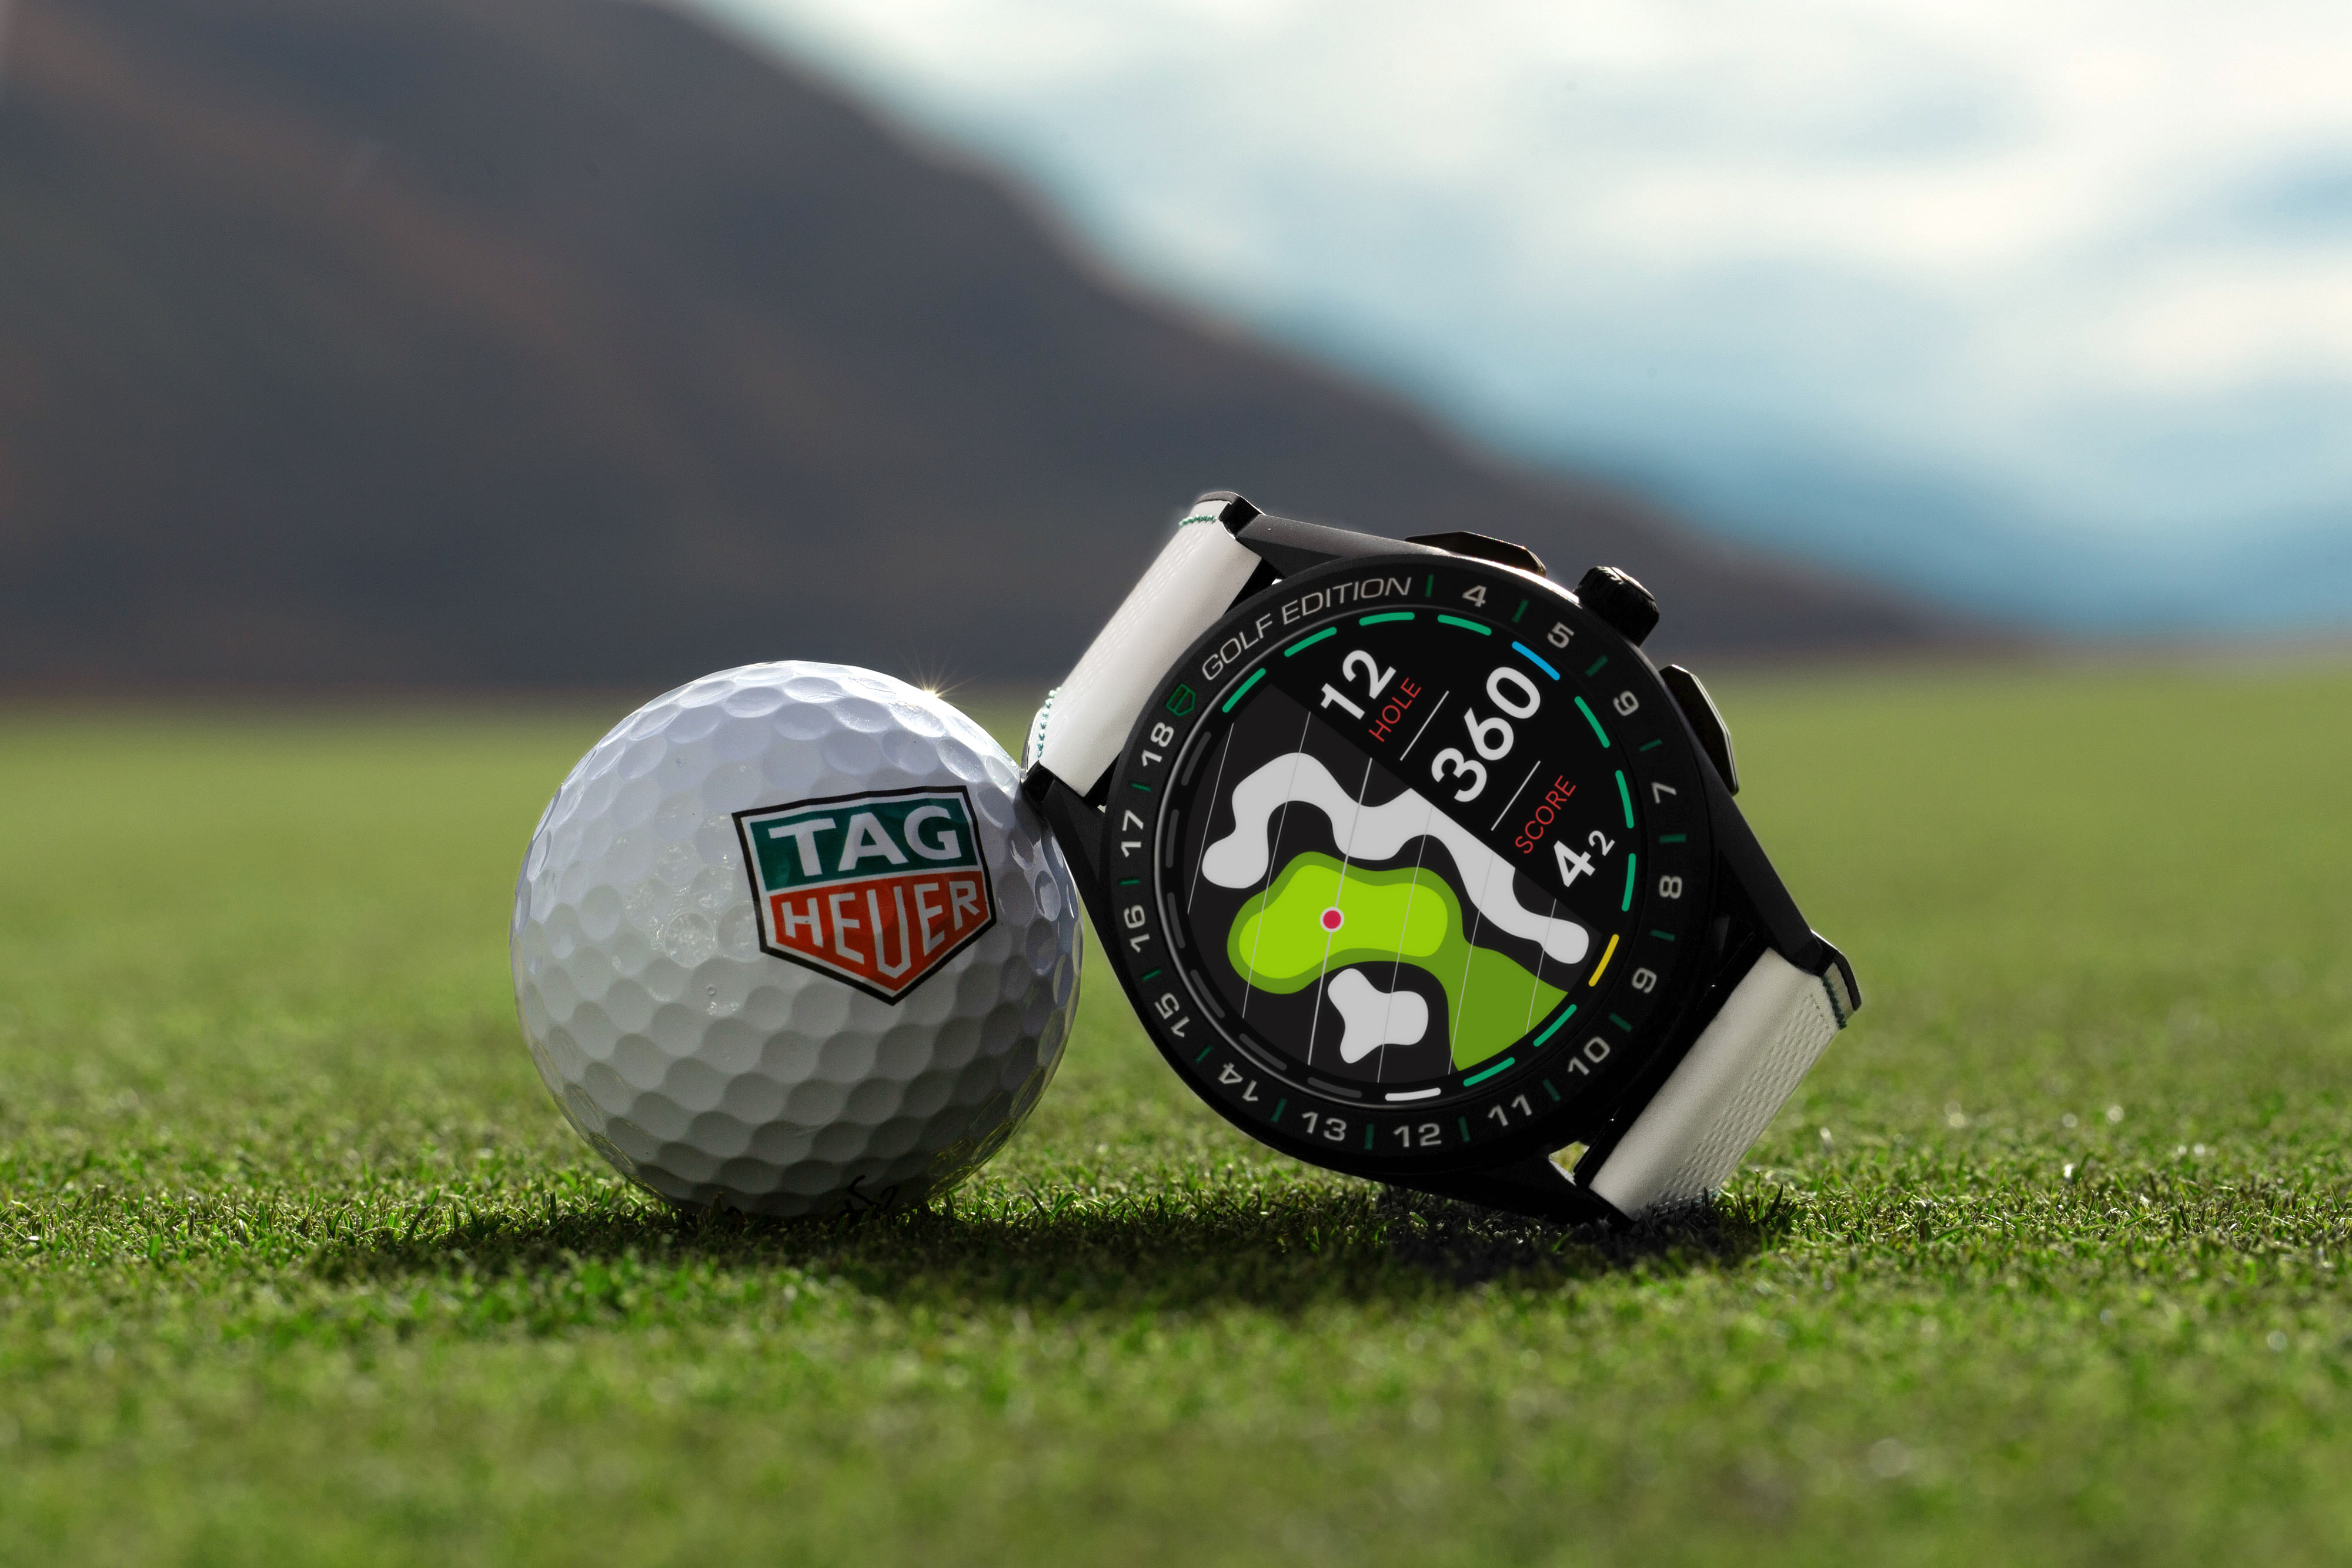 The TAG Heuer Connected Golf edition smartwatch has about 40,000 courses on its app.